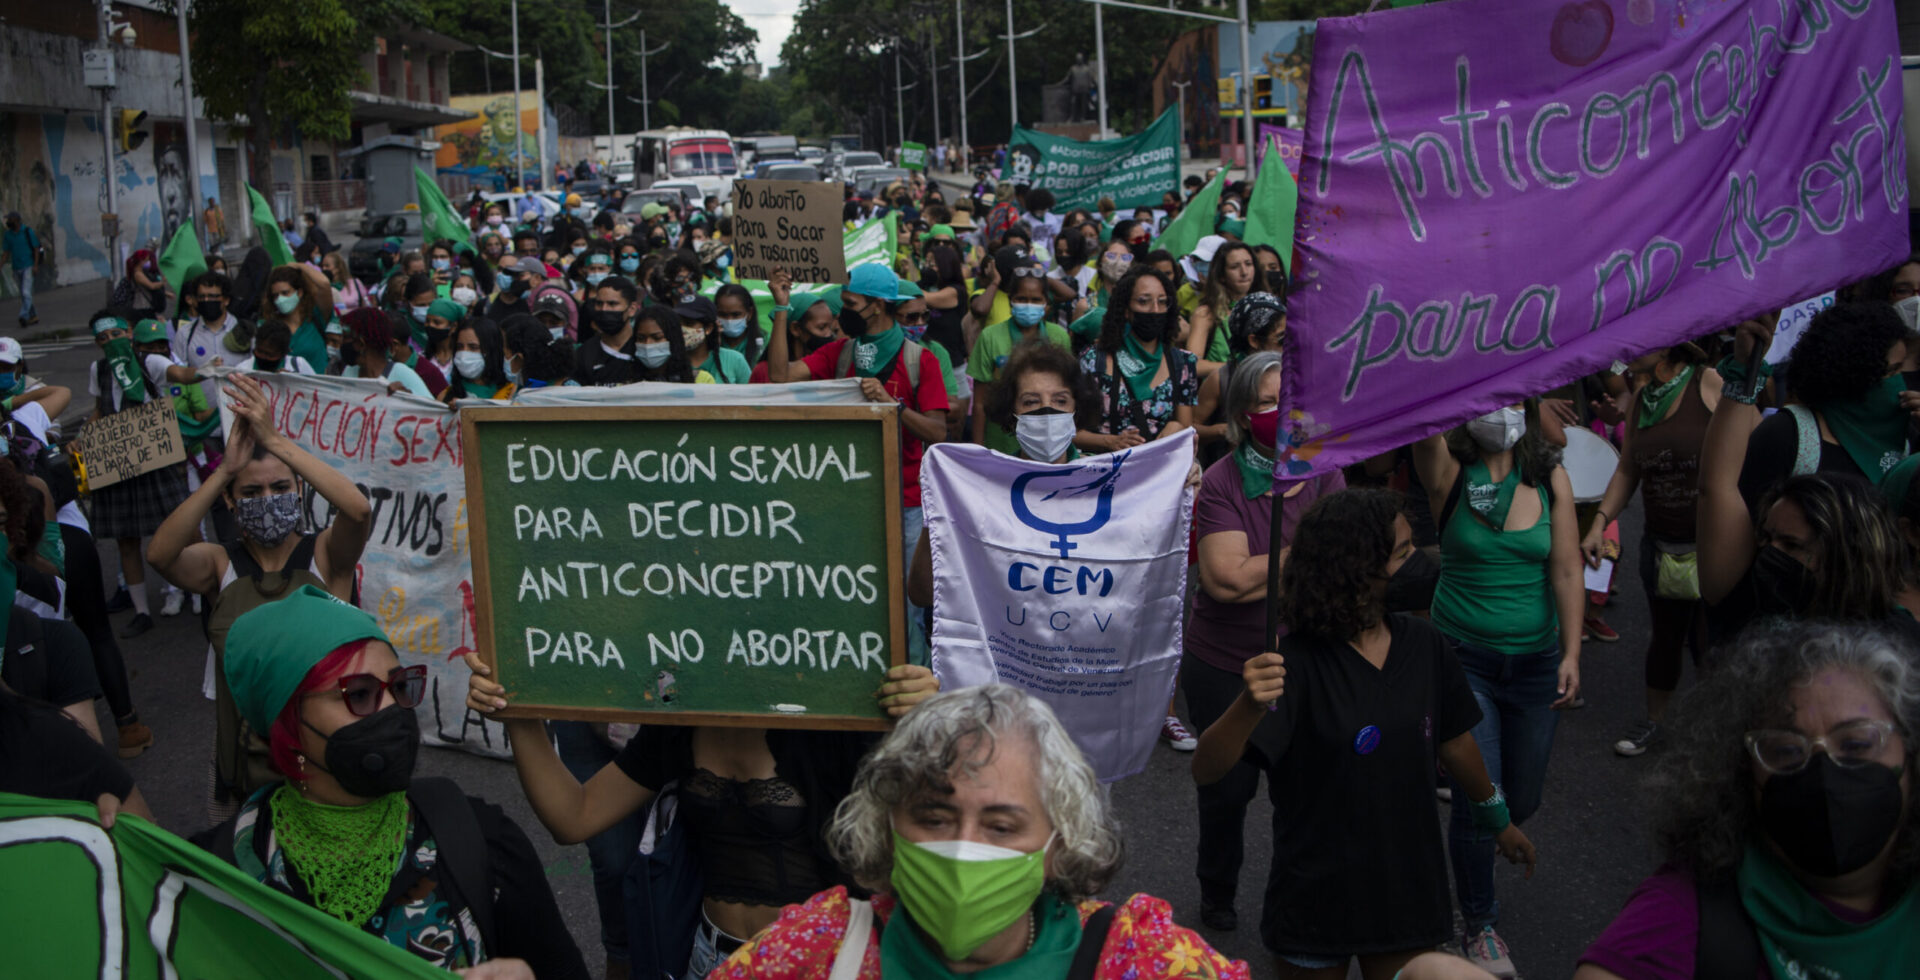 Demonstration for the decriminalization of abortion during the World Day of Action for Legal and Safe Abortion in Latin America and the Caribbean in Caracas.